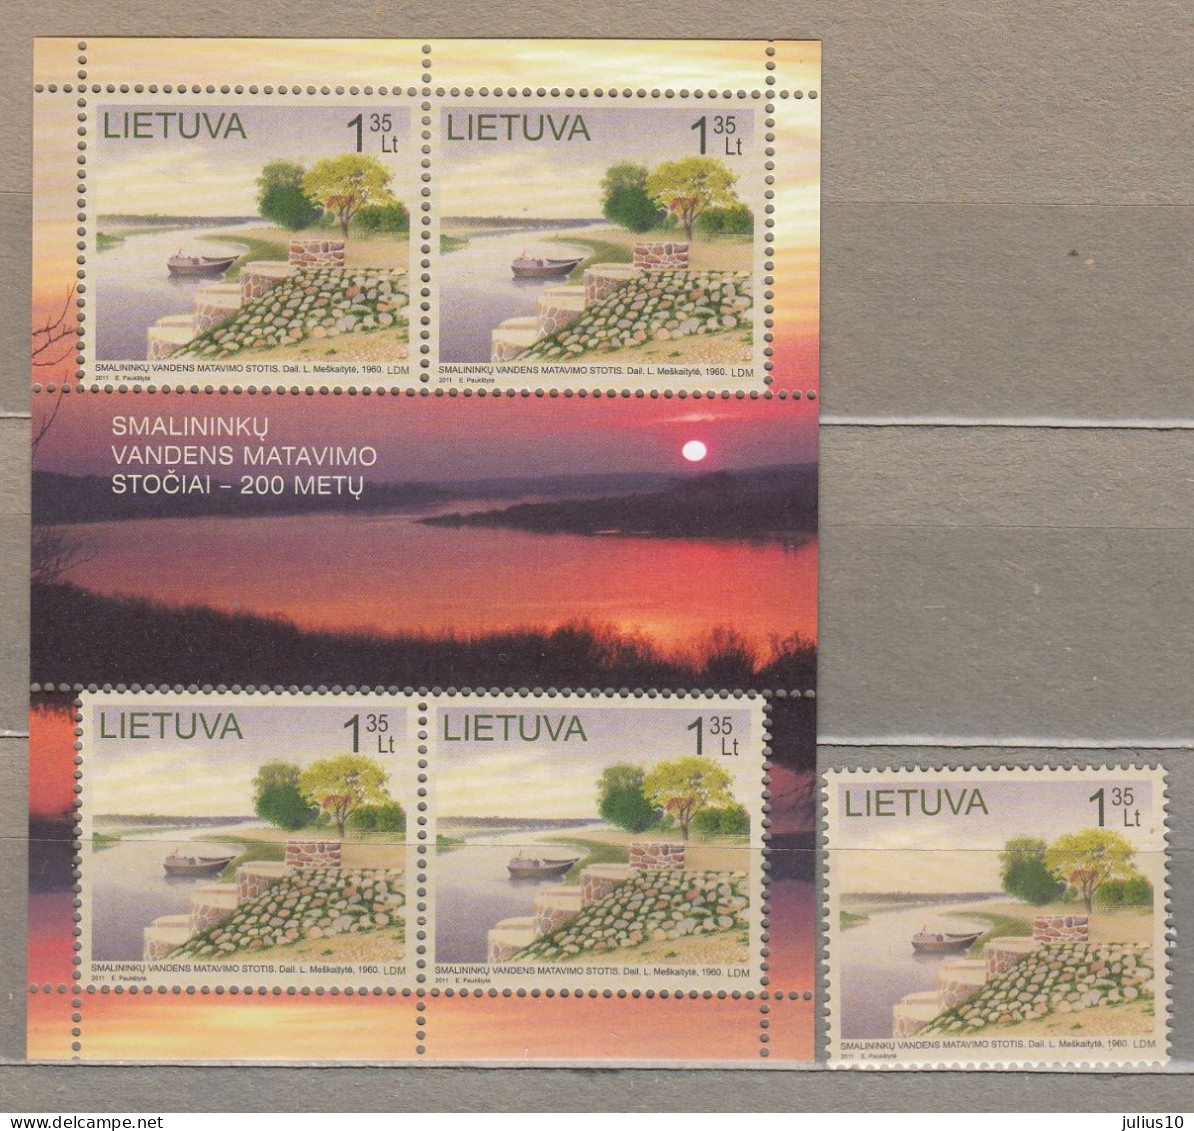 LITHUANIA 2011 Water Measuring Station MNH(**) Mi 1073 Bl 43 #Lt881 - Lithuania